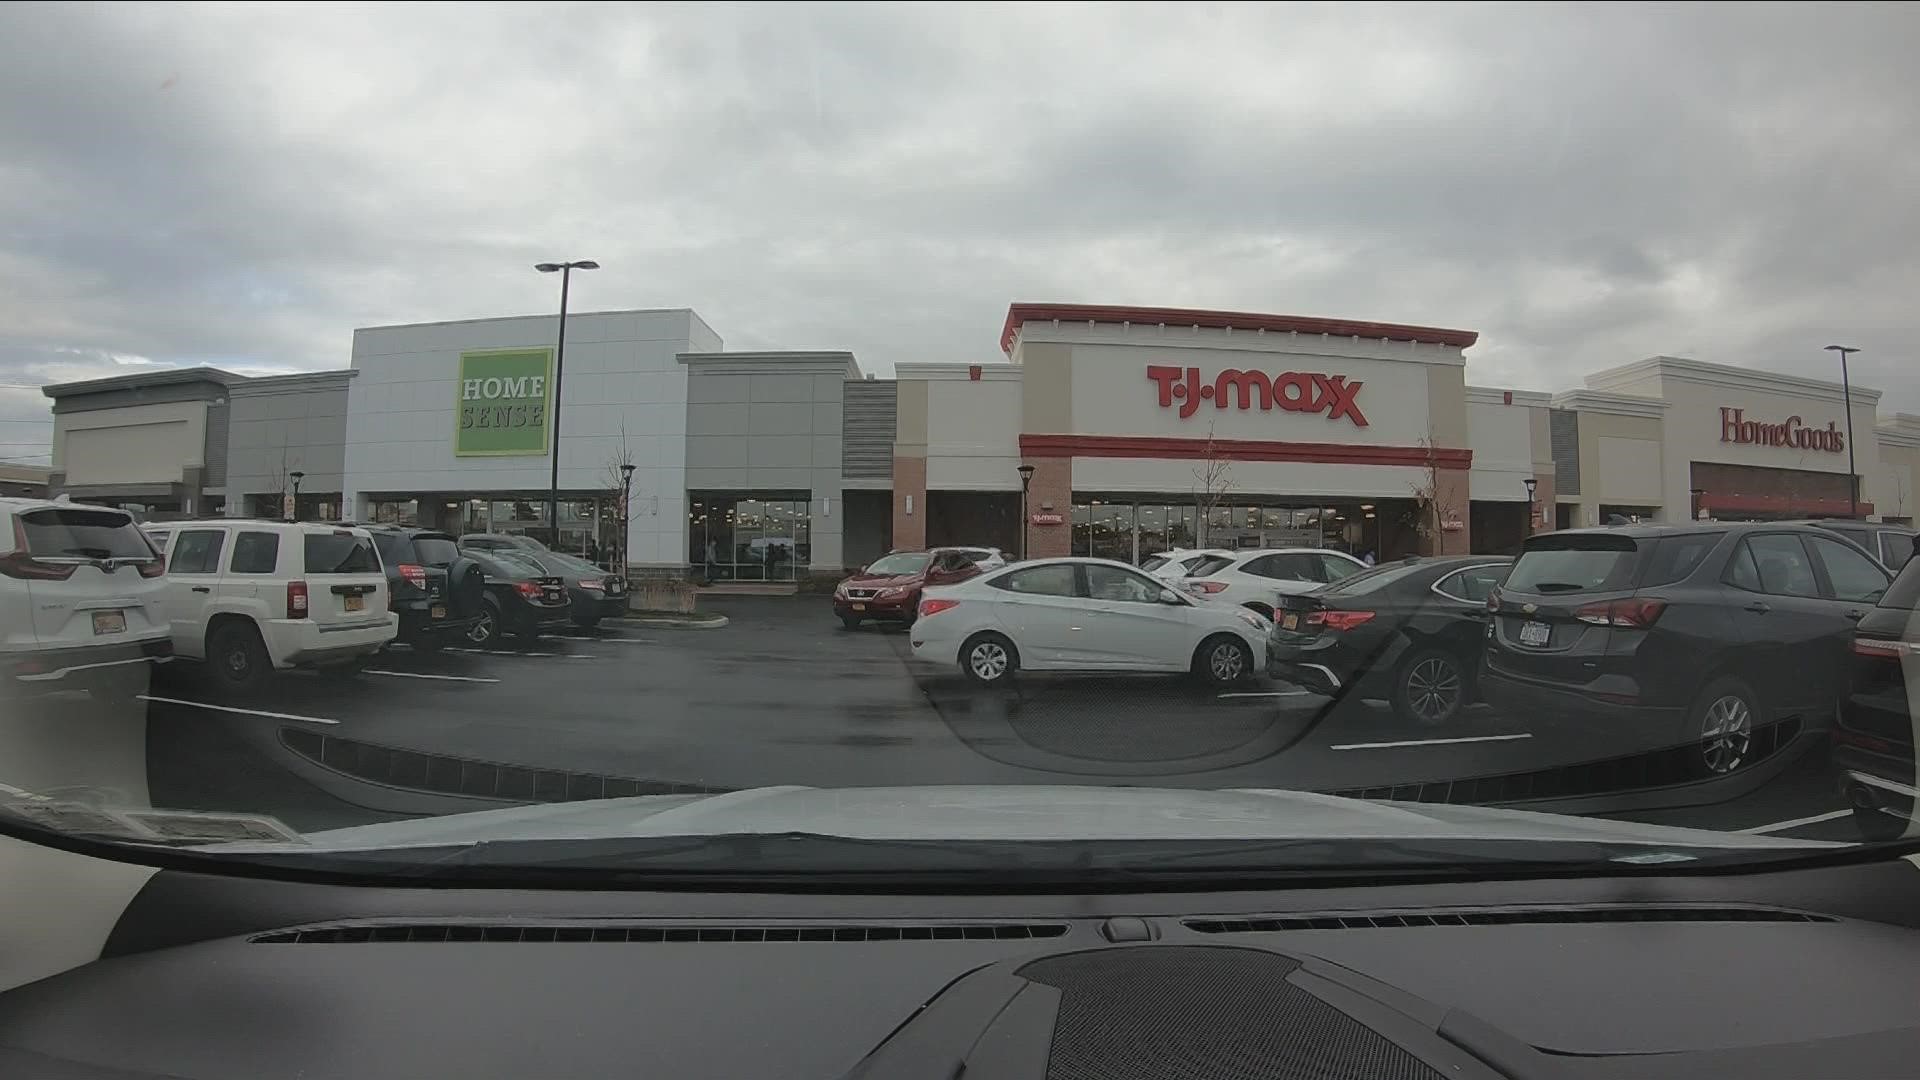 The former Burlington plaza in Amherst recently welcomed four new stores